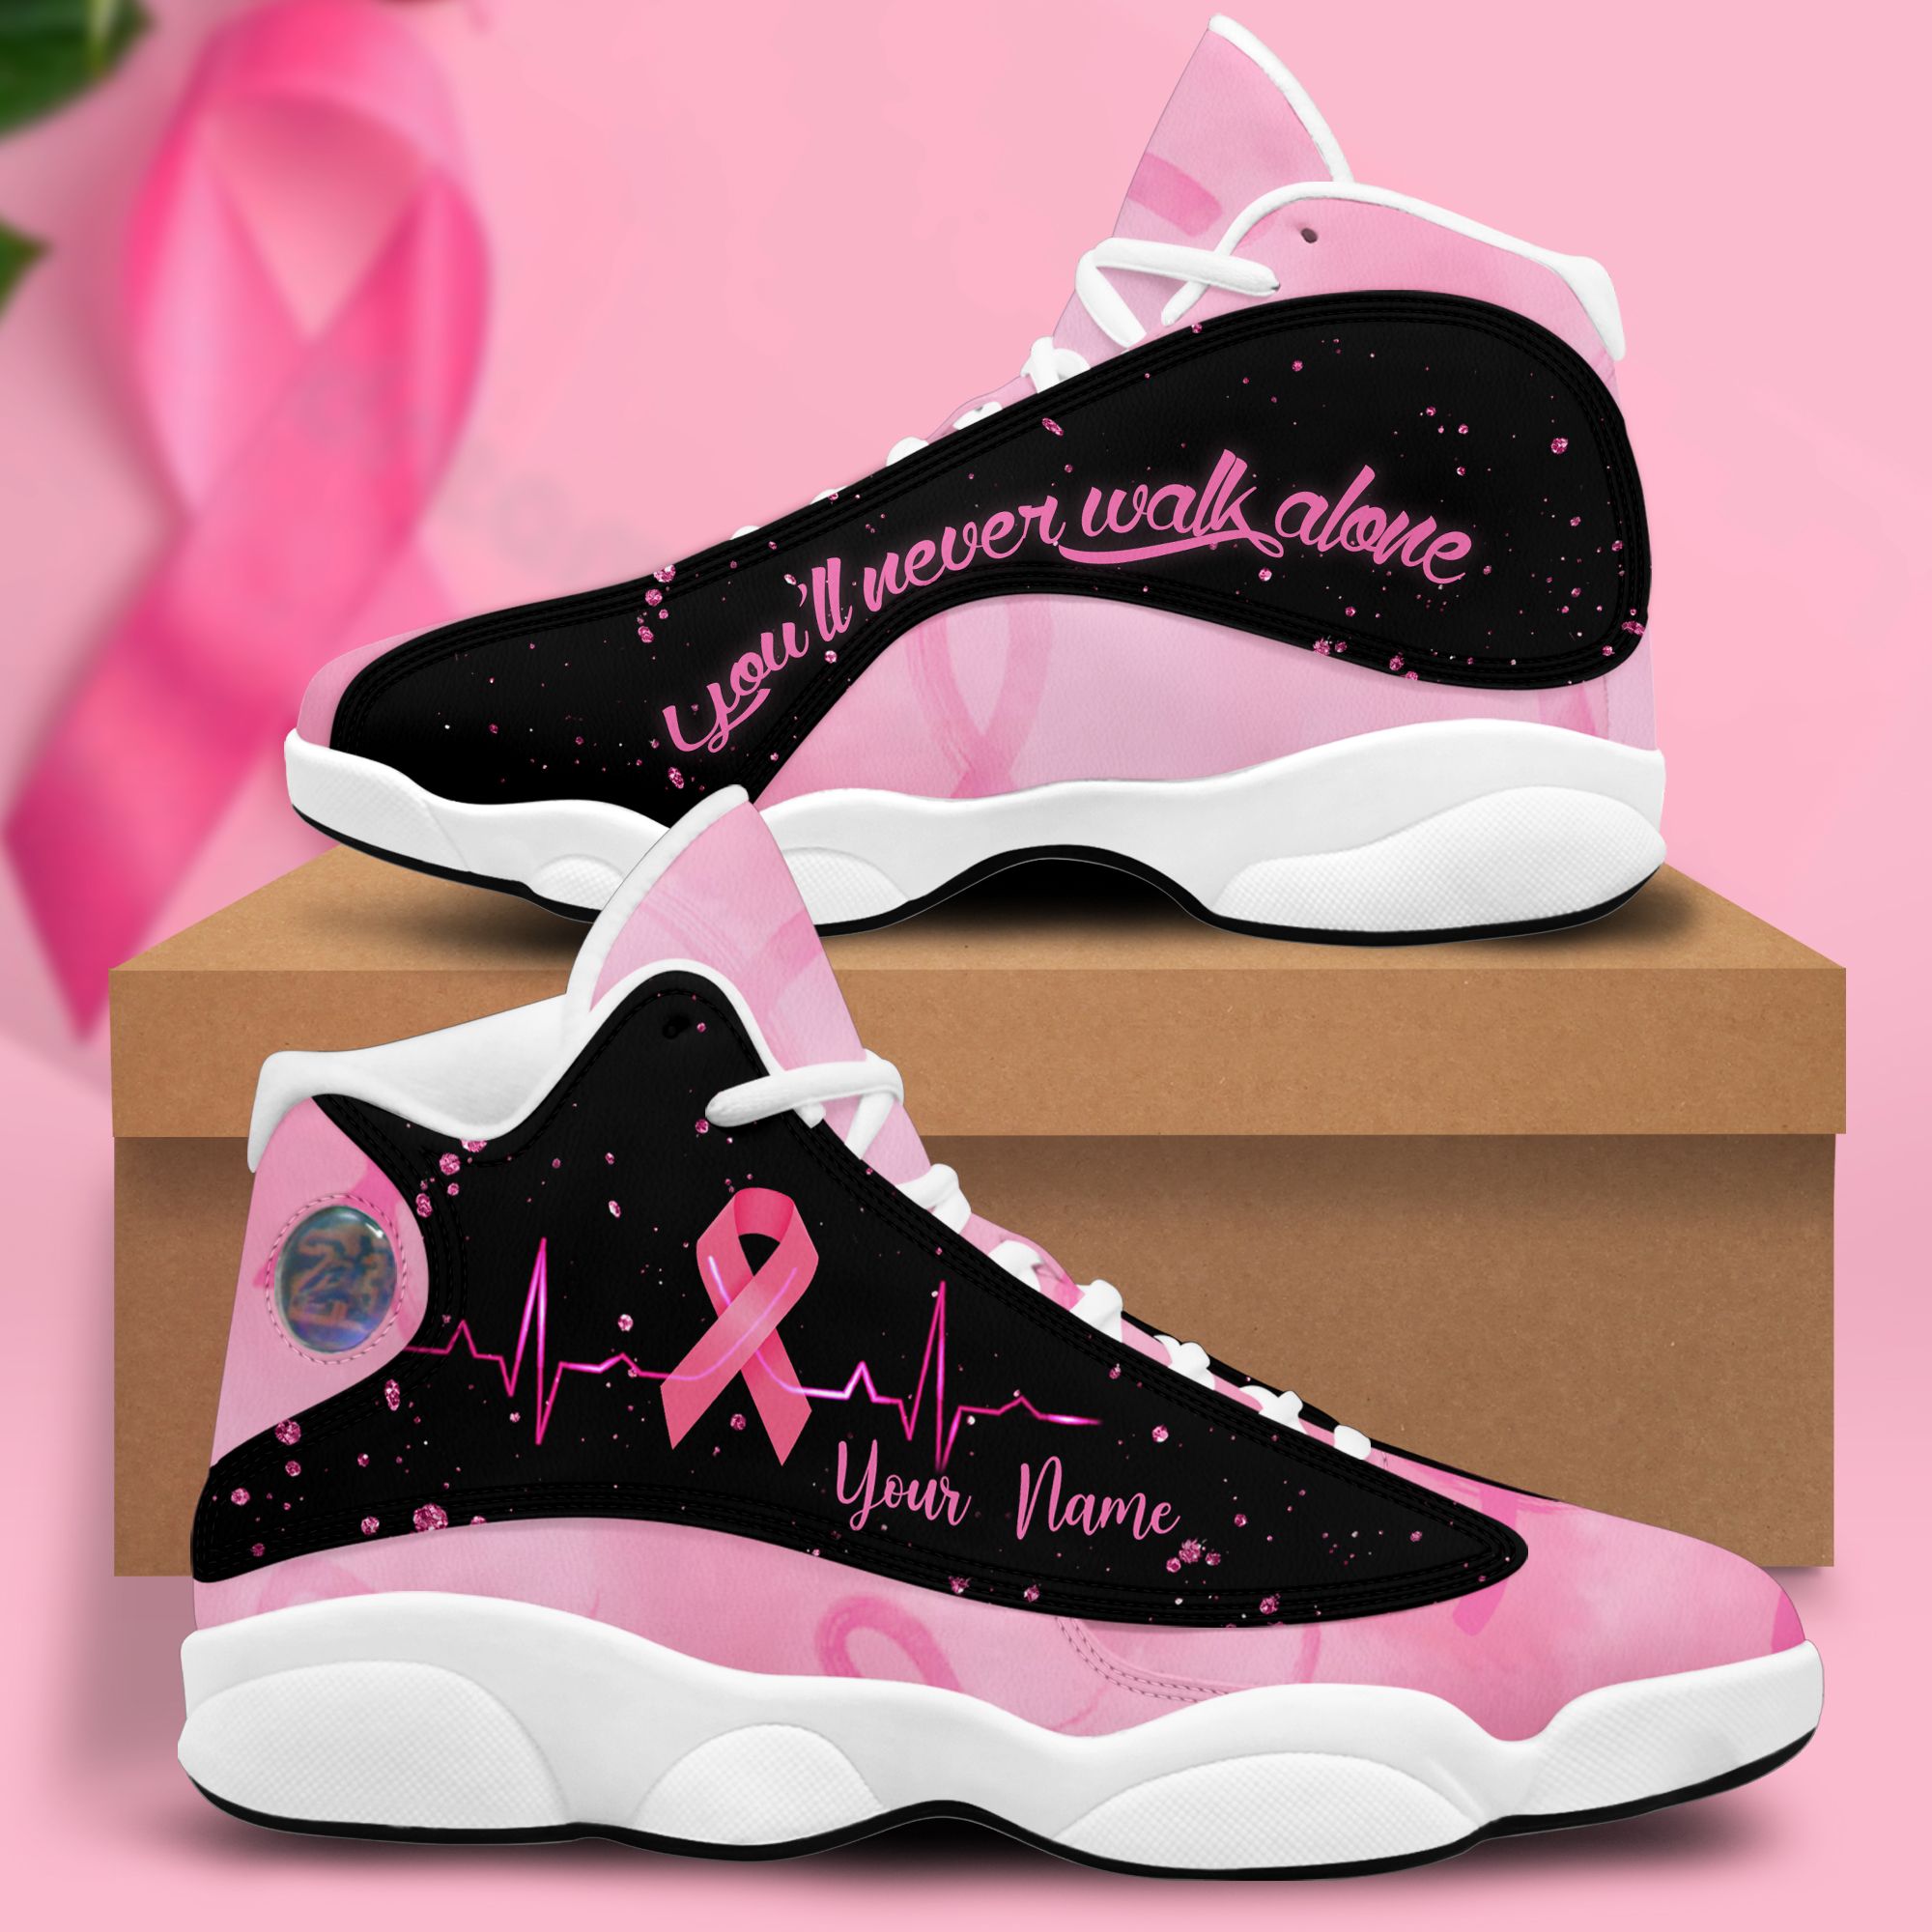 Breast Cancer heart beat you will never walk alone custom personalized name Air Jorden 13 shoes – LIMITED EDTION